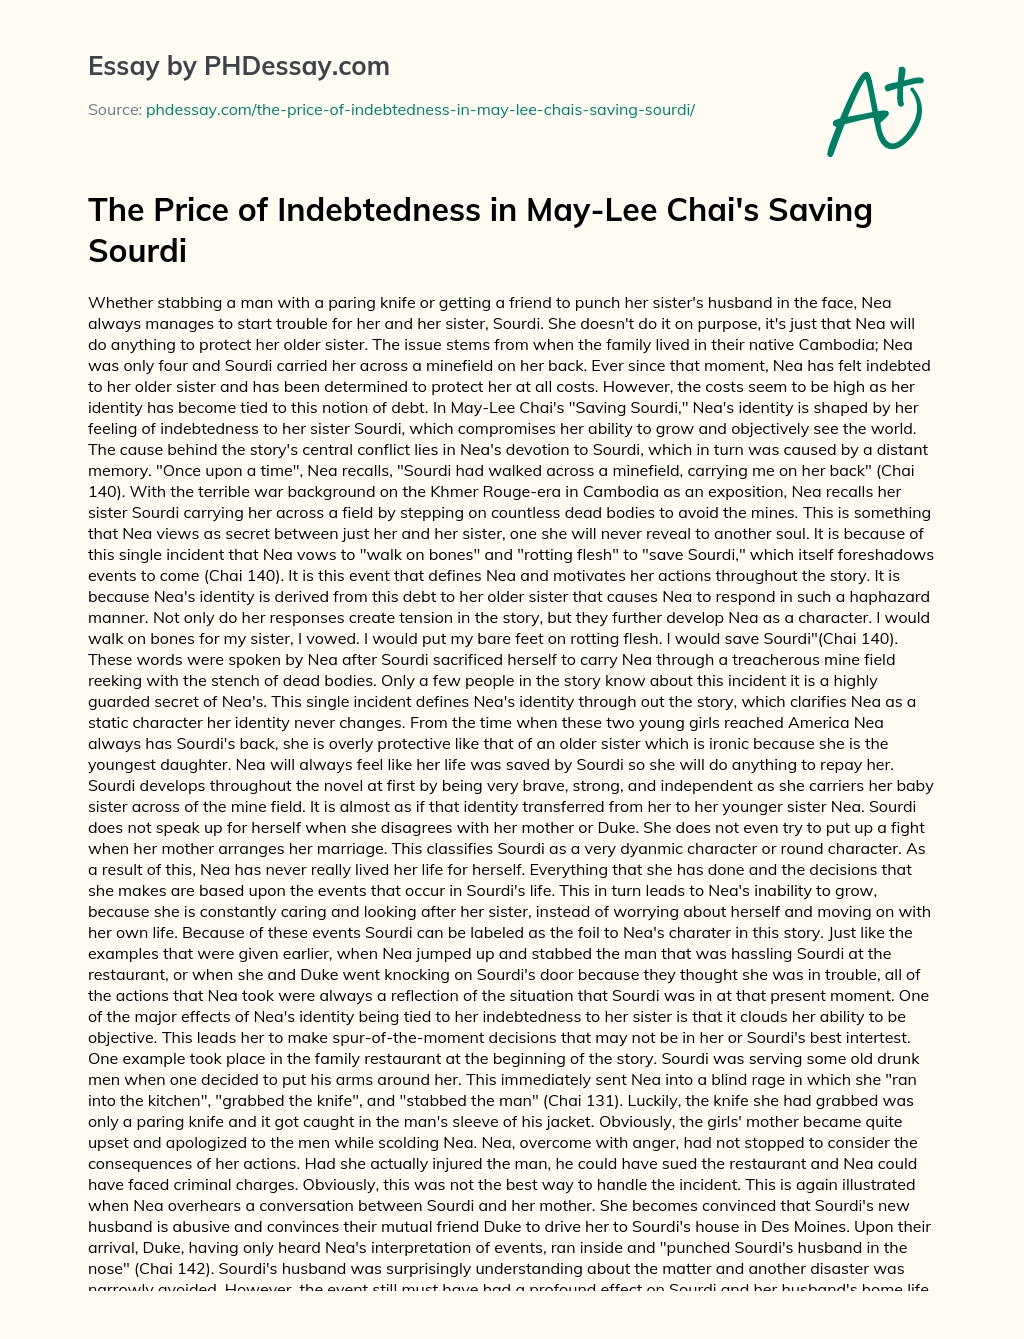 The Price of Indebtedness in May-Lee Chai’s Saving Sourdi essay